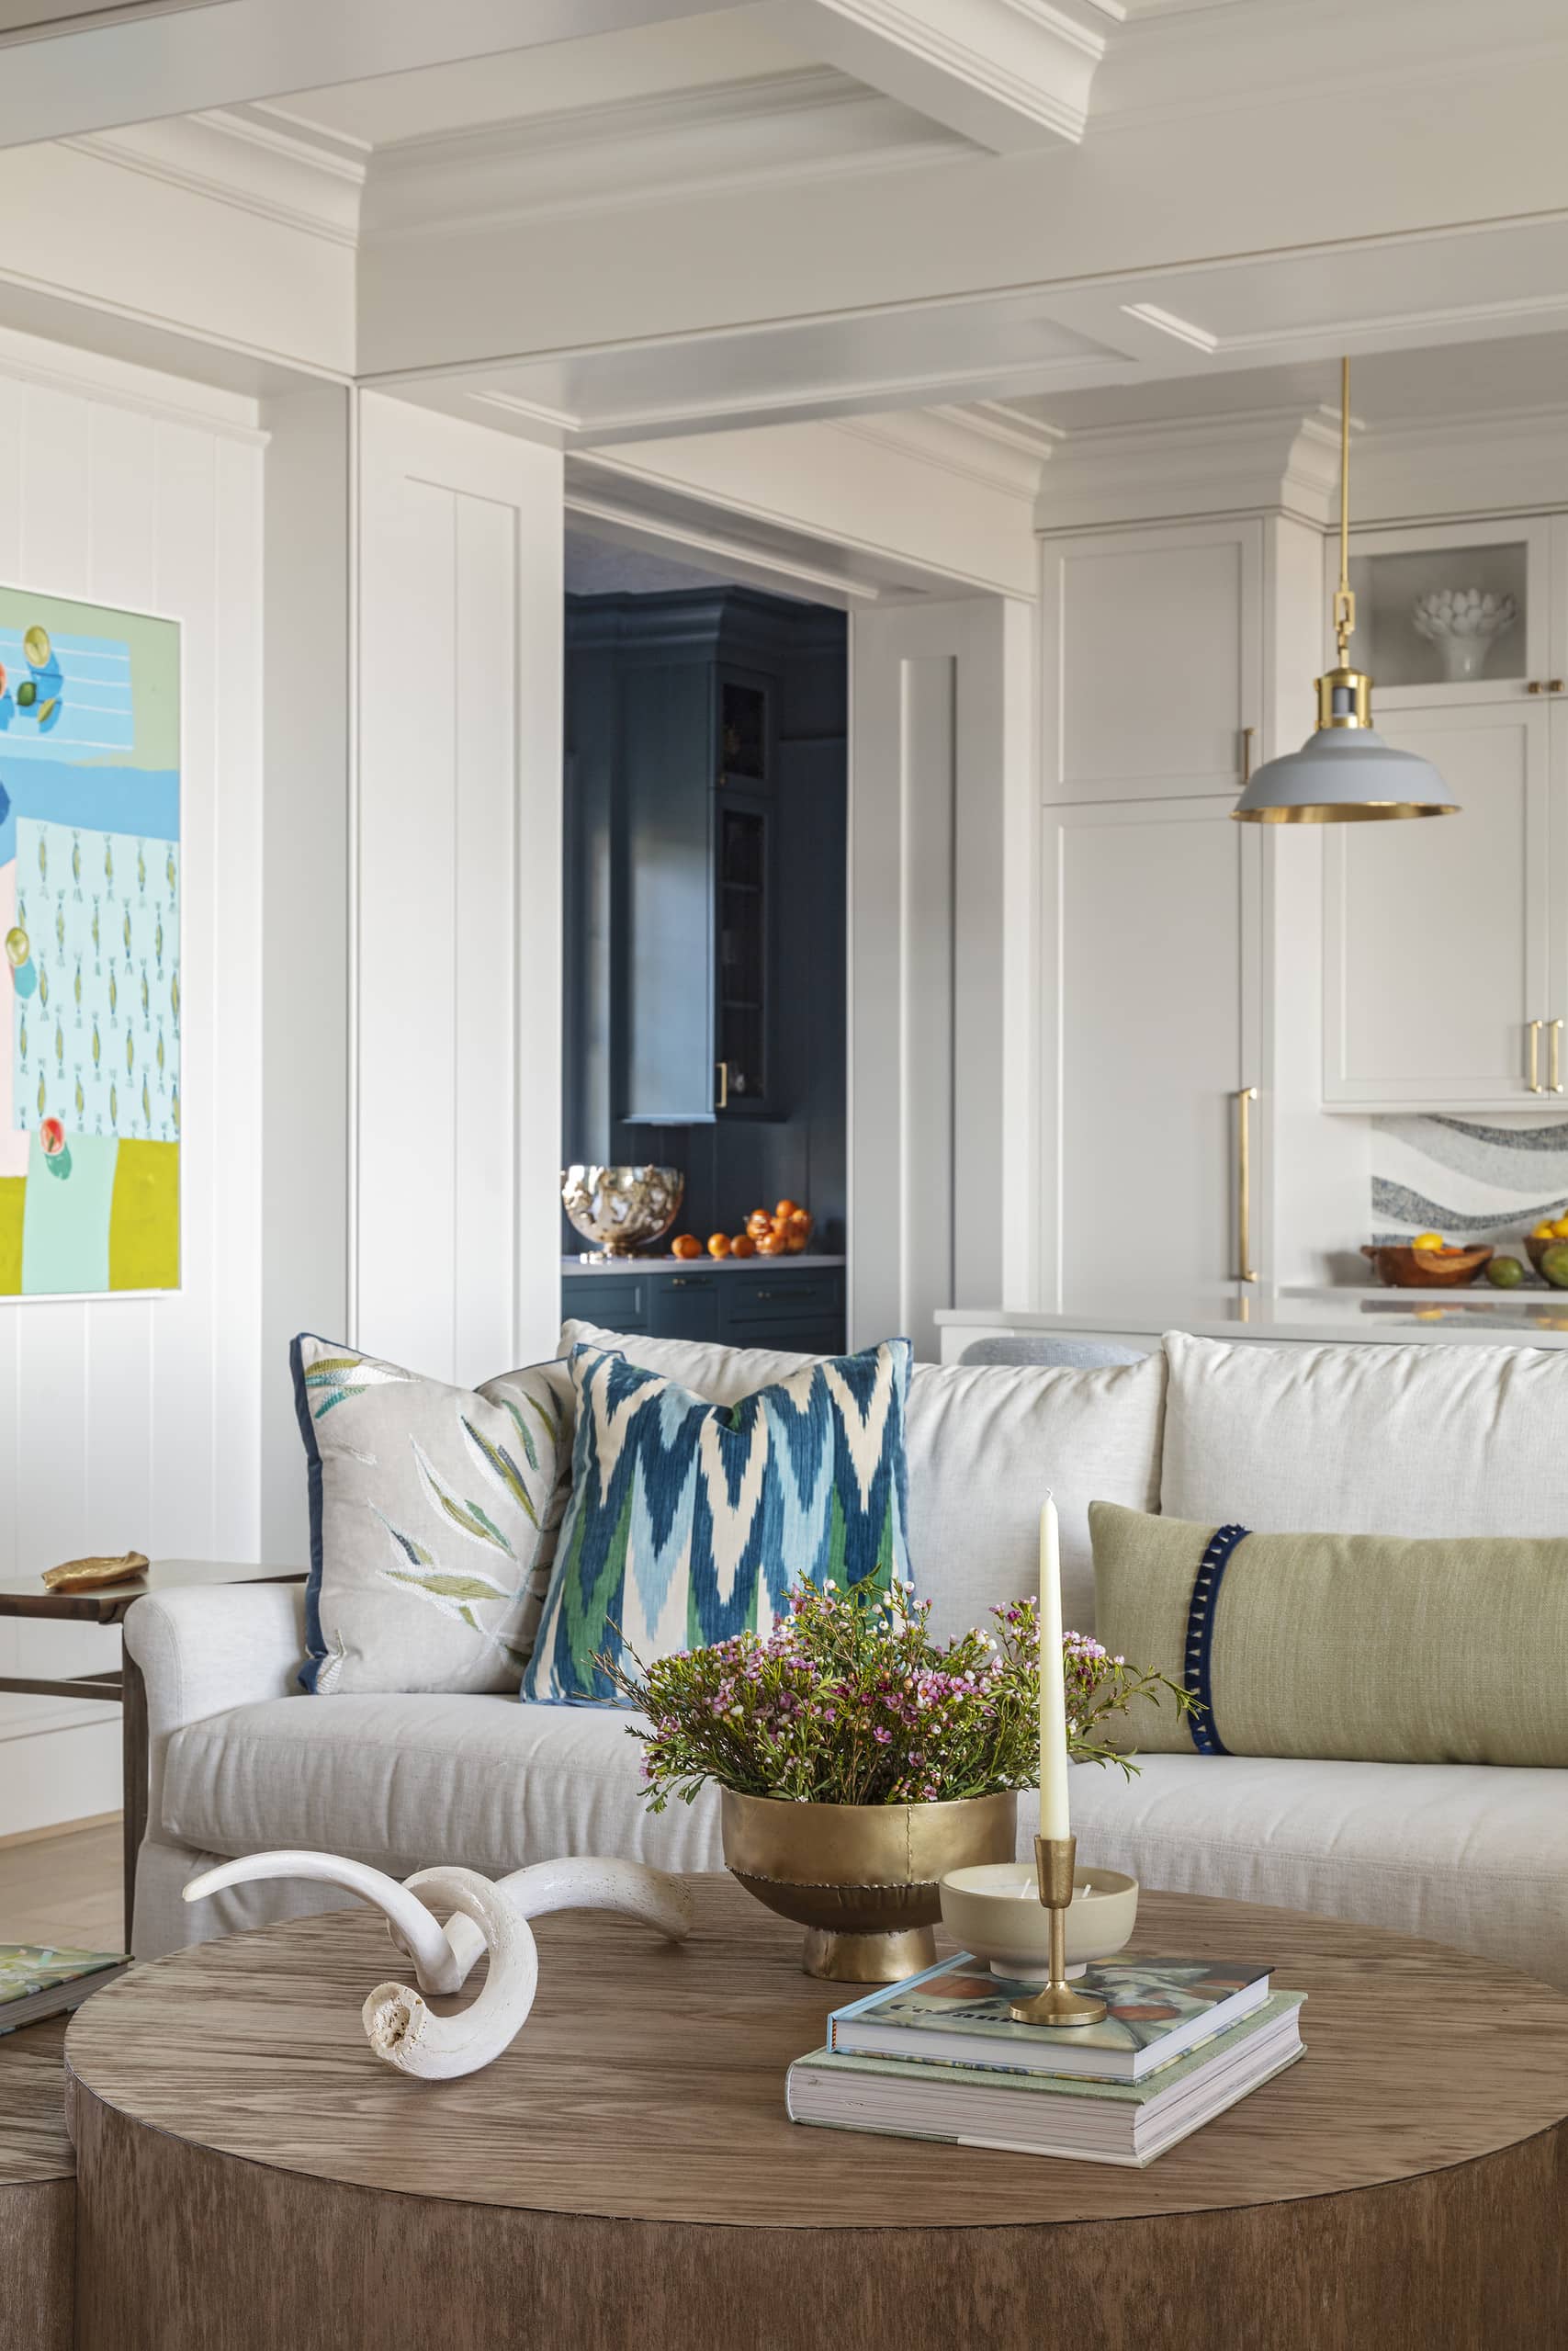 Transitional home tour featuring traditional decor, designed by Margaret Donaldson